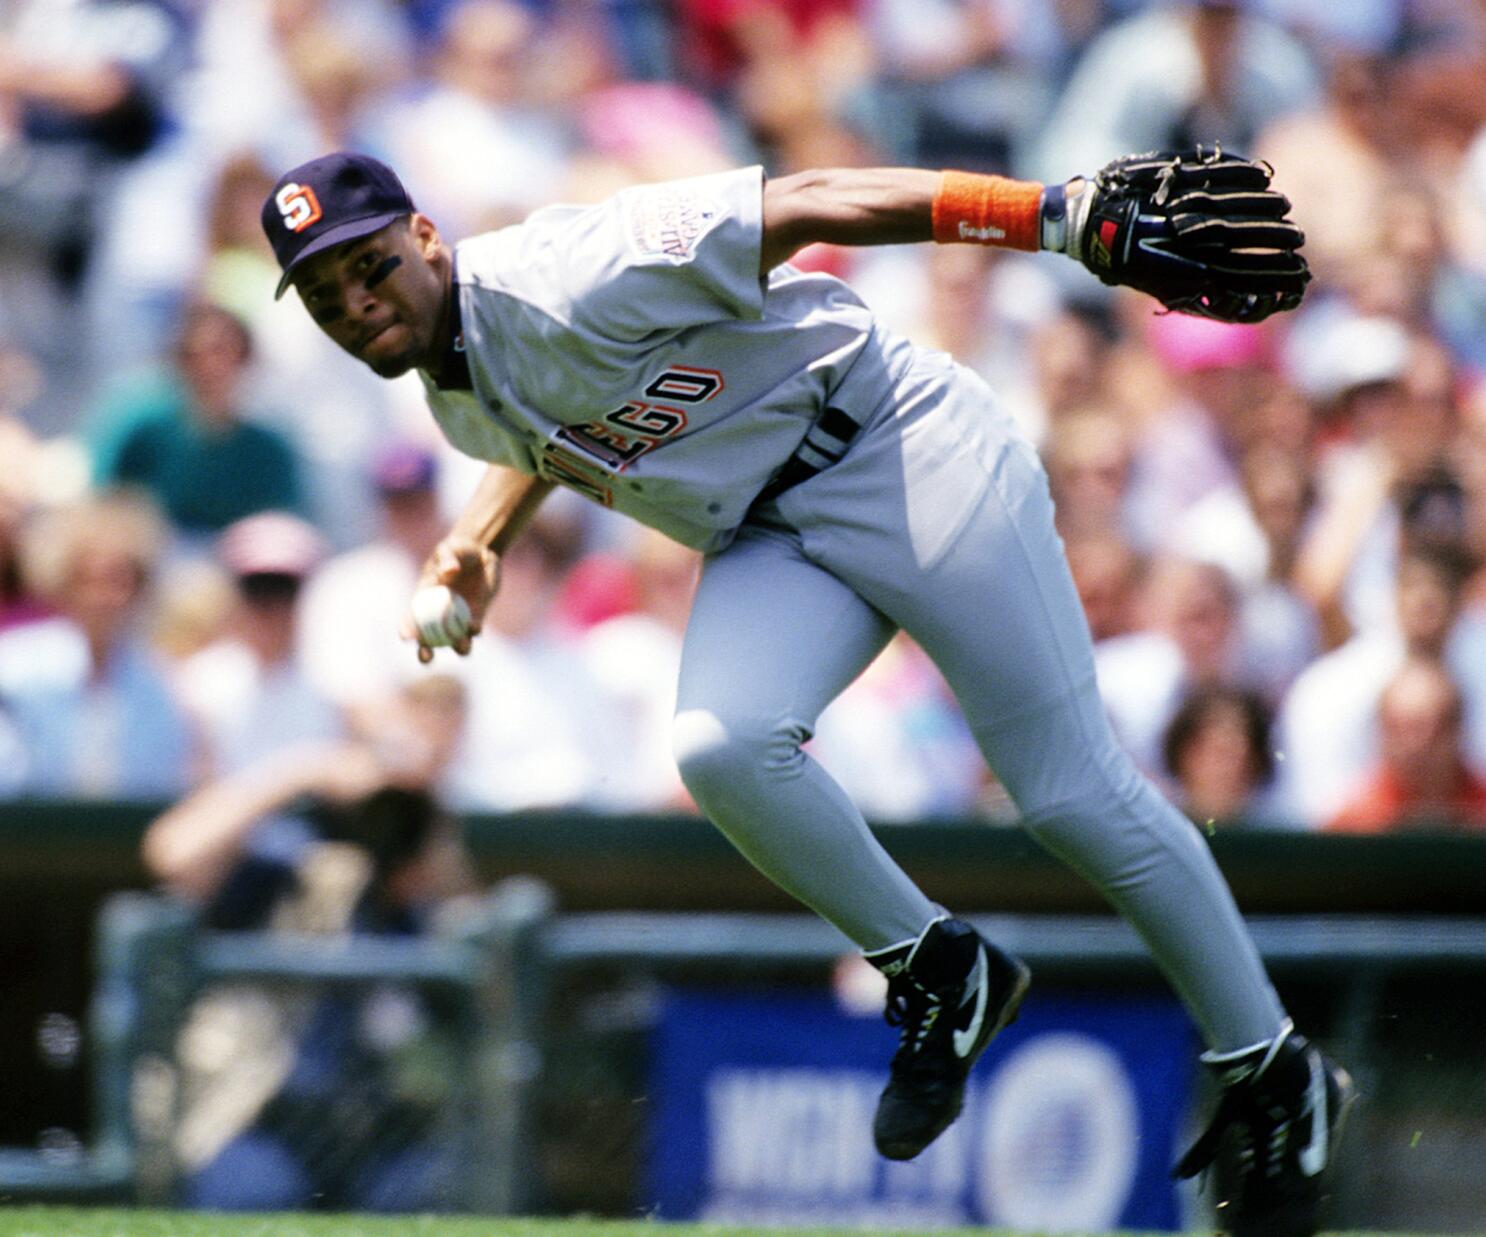 Former Padre Gary Sheffield looking for momentum on Hall ballot